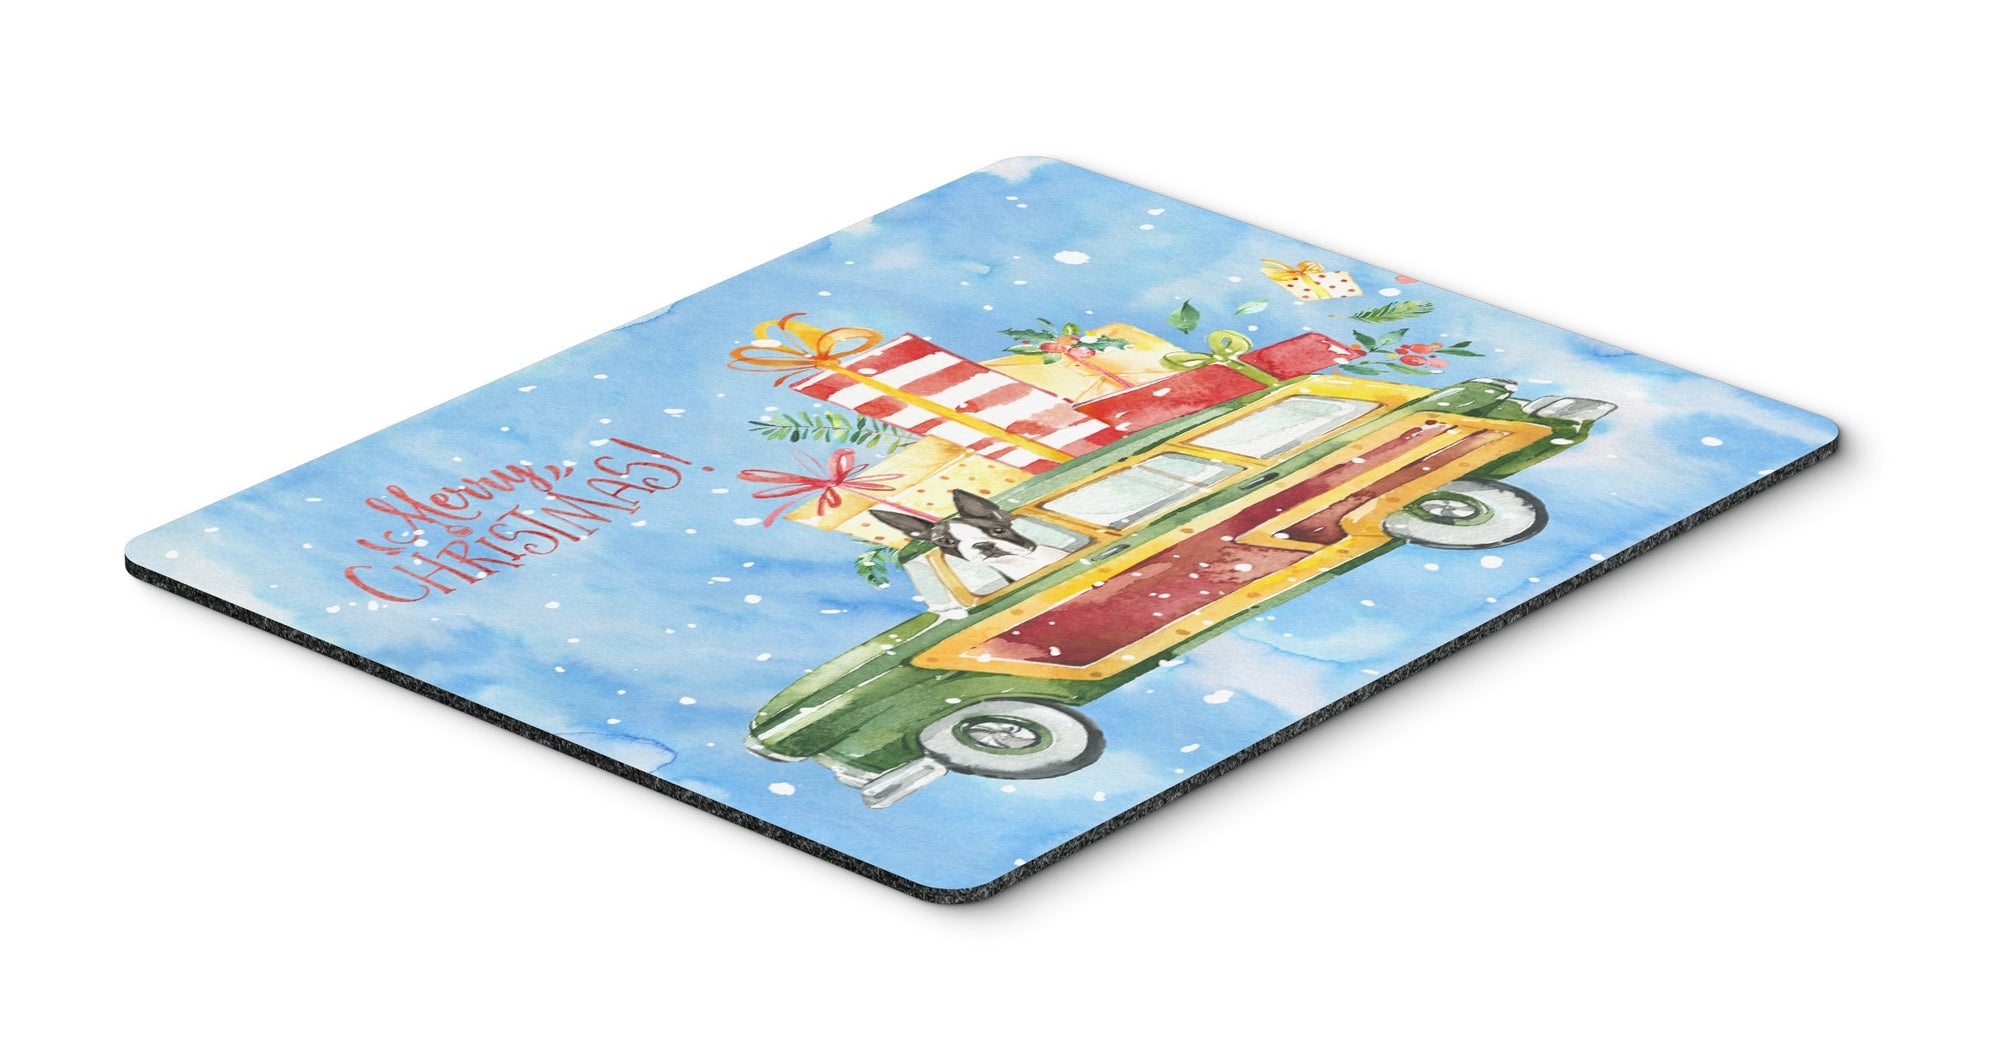 Merry Christmas Boston Terrier Mouse Pad, Hot Pad or Trivet CK2397MP by Caroline's Treasures